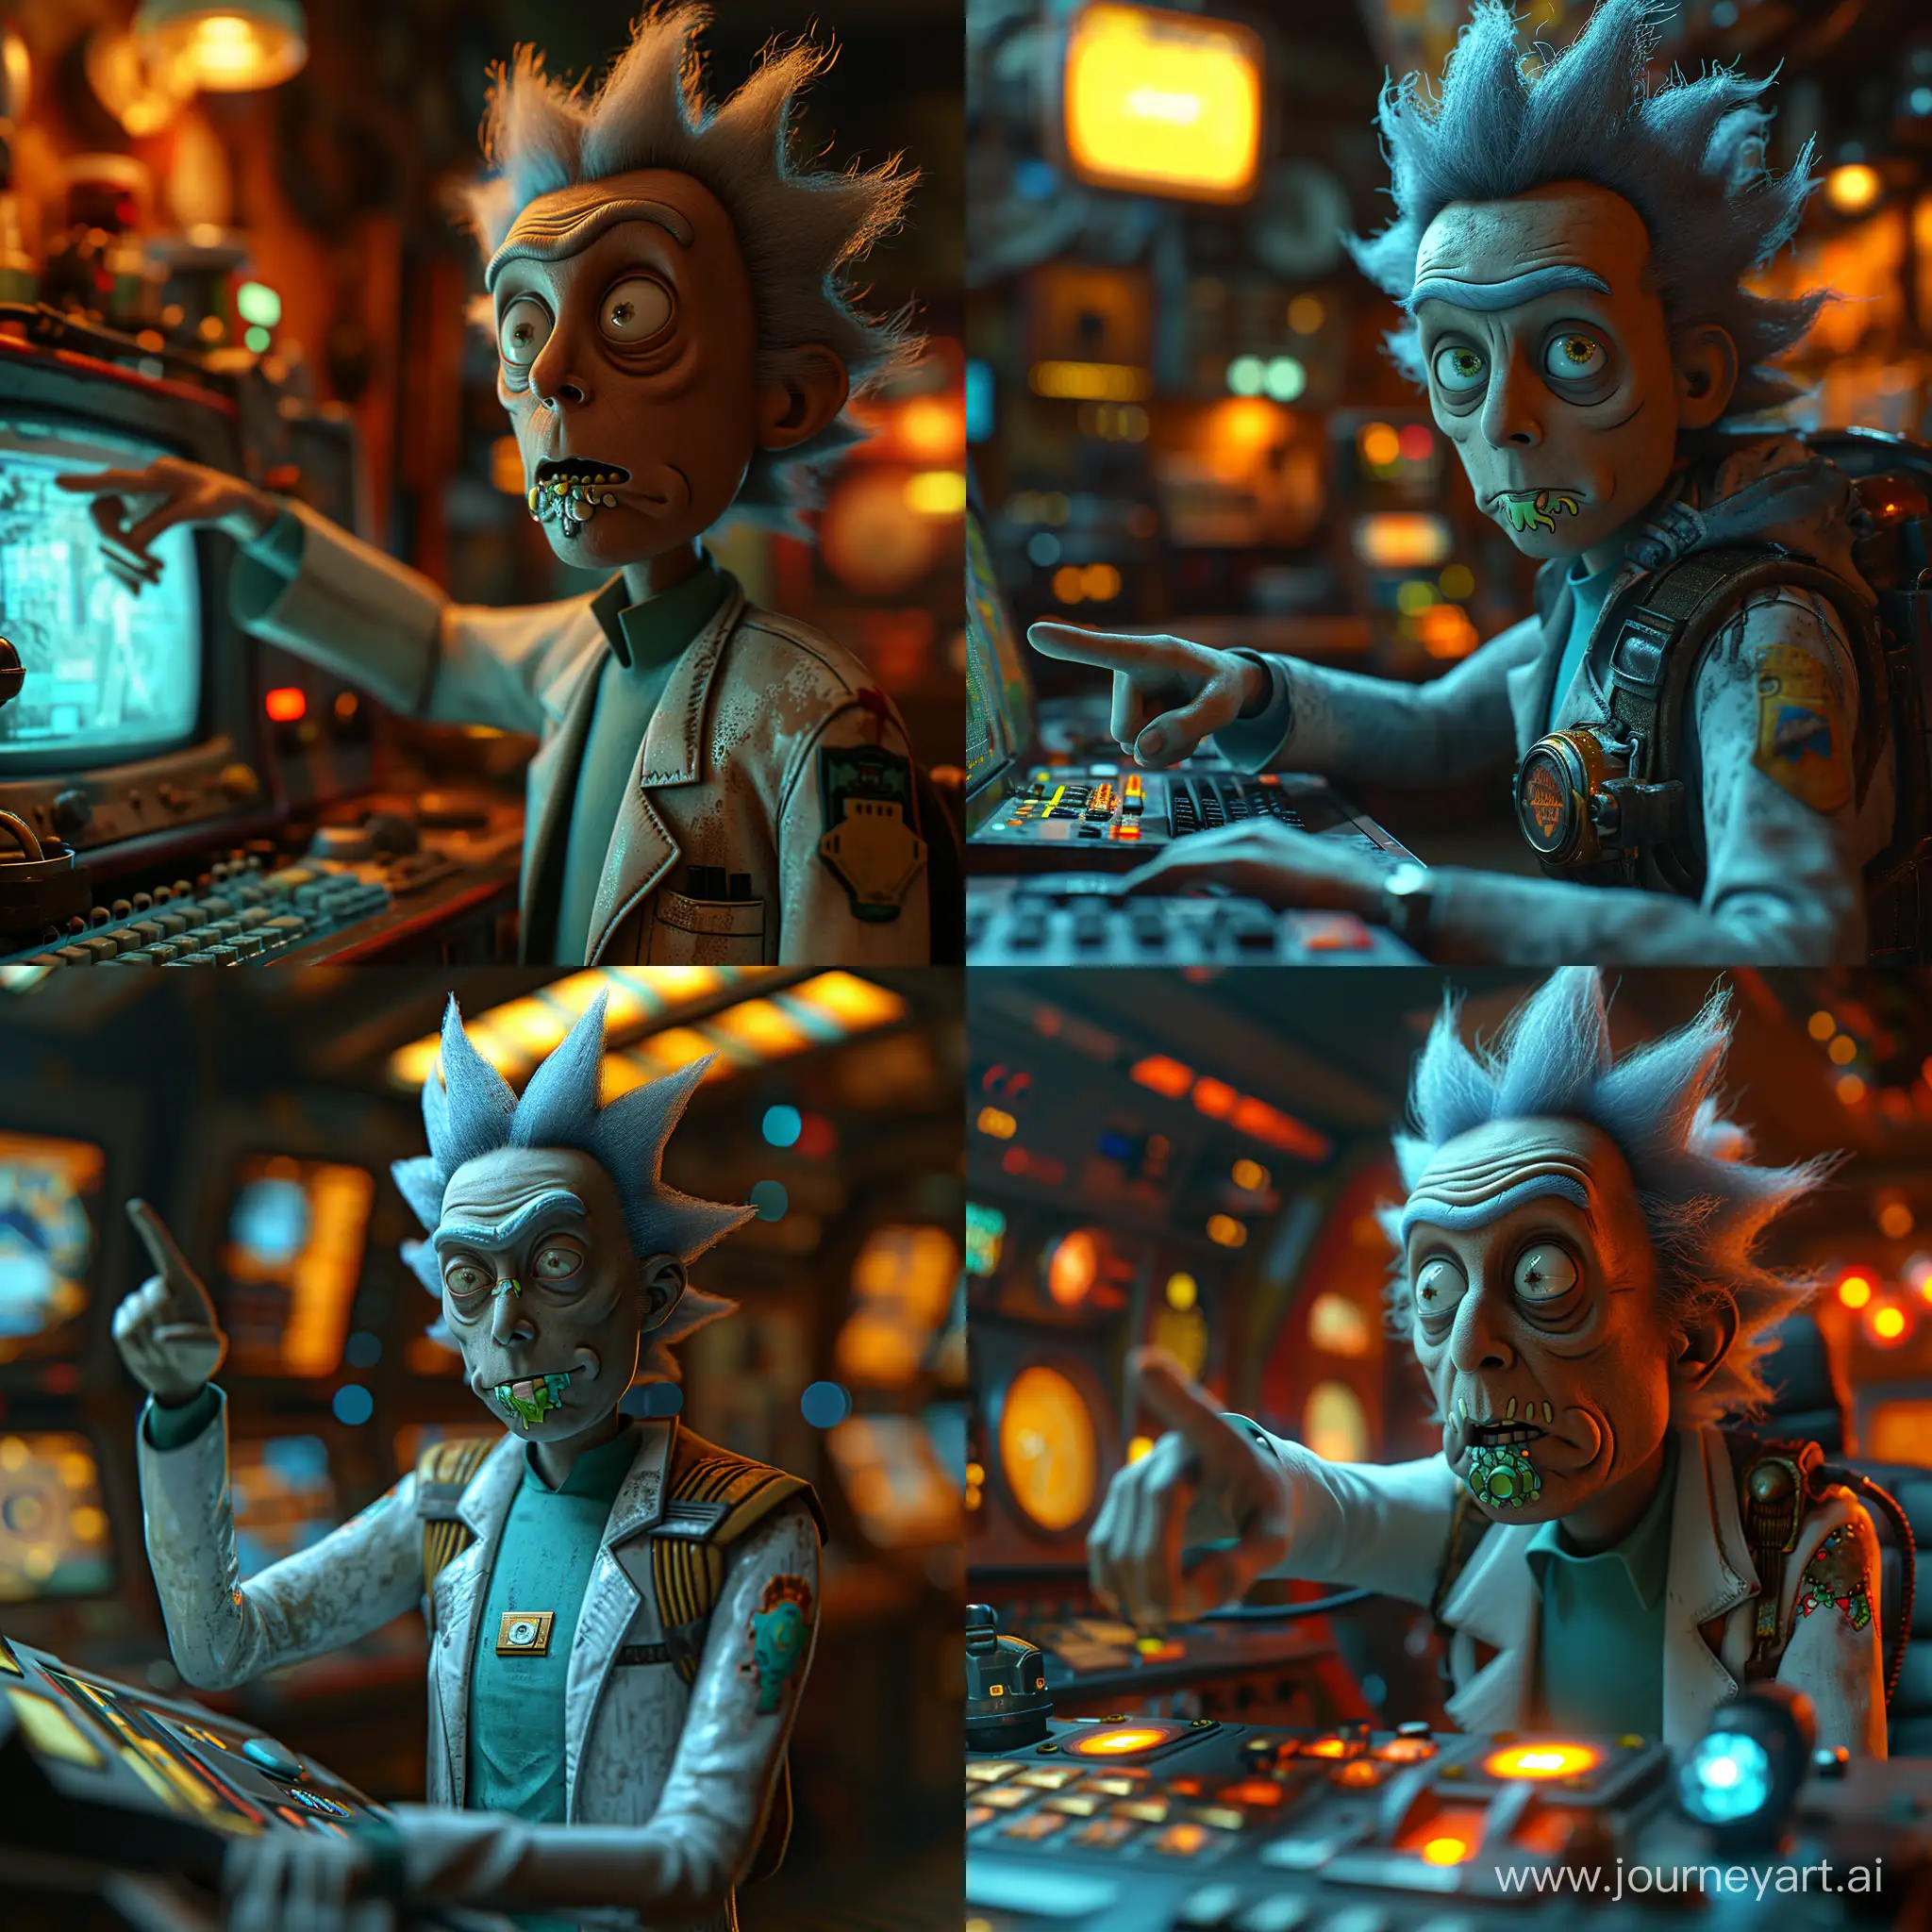 Rick-from-Rick-and-Morty-Pointing-at-Computer-in-Unreal-Engine-3D-Style